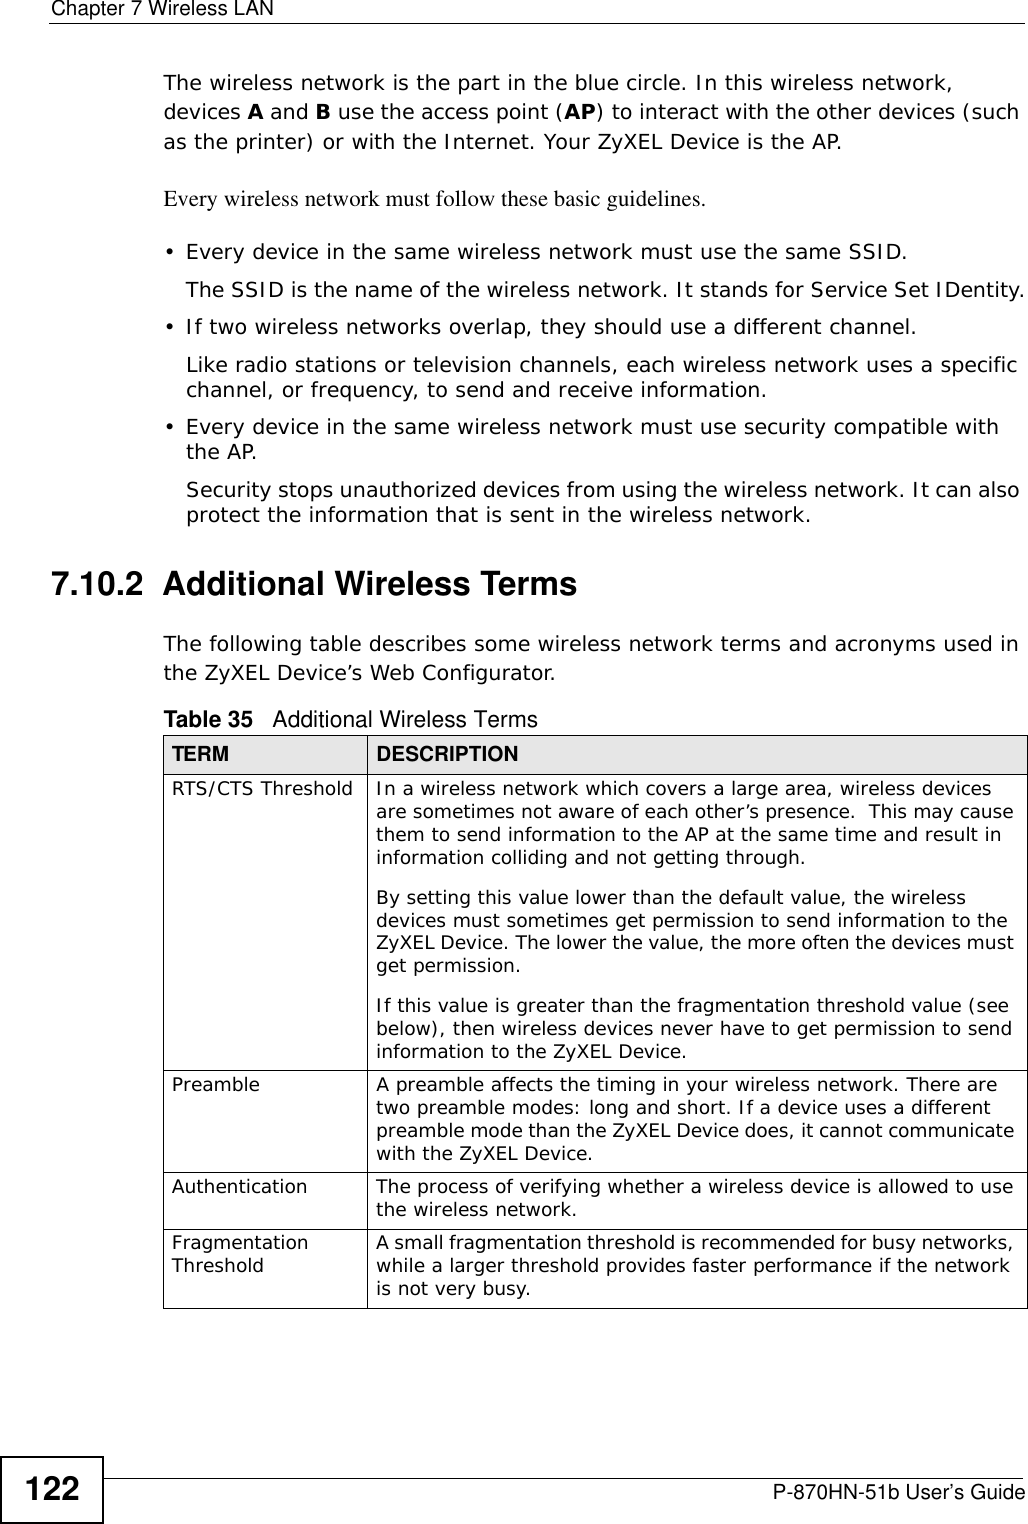 Chapter 7 Wireless LANP-870HN-51b User’s Guide122The wireless network is the part in the blue circle. In this wireless network, devices A and B use the access point (AP) to interact with the other devices (such as the printer) or with the Internet. Your ZyXEL Device is the AP.Every wireless network must follow these basic guidelines.• Every device in the same wireless network must use the same SSID.The SSID is the name of the wireless network. It stands for Service Set IDentity.• If two wireless networks overlap, they should use a different channel.Like radio stations or television channels, each wireless network uses a specific channel, or frequency, to send and receive information.• Every device in the same wireless network must use security compatible with the AP.Security stops unauthorized devices from using the wireless network. It can also protect the information that is sent in the wireless network.7.10.2  Additional Wireless TermsThe following table describes some wireless network terms and acronyms used in the ZyXEL Device’s Web Configurator.Table 35   Additional Wireless TermsTERM DESCRIPTIONRTS/CTS Threshold In a wireless network which covers a large area, wireless devices are sometimes not aware of each other’s presence.  This may cause them to send information to the AP at the same time and result in information colliding and not getting through.By setting this value lower than the default value, the wireless devices must sometimes get permission to send information to the ZyXEL Device. The lower the value, the more often the devices must get permission.If this value is greater than the fragmentation threshold value (see below), then wireless devices never have to get permission to send information to the ZyXEL Device.Preamble A preamble affects the timing in your wireless network. There are two preamble modes: long and short. If a device uses a different preamble mode than the ZyXEL Device does, it cannot communicate with the ZyXEL Device.Authentication The process of verifying whether a wireless device is allowed to use the wireless network.Fragmentation Threshold A small fragmentation threshold is recommended for busy networks, while a larger threshold provides faster performance if the network is not very busy.